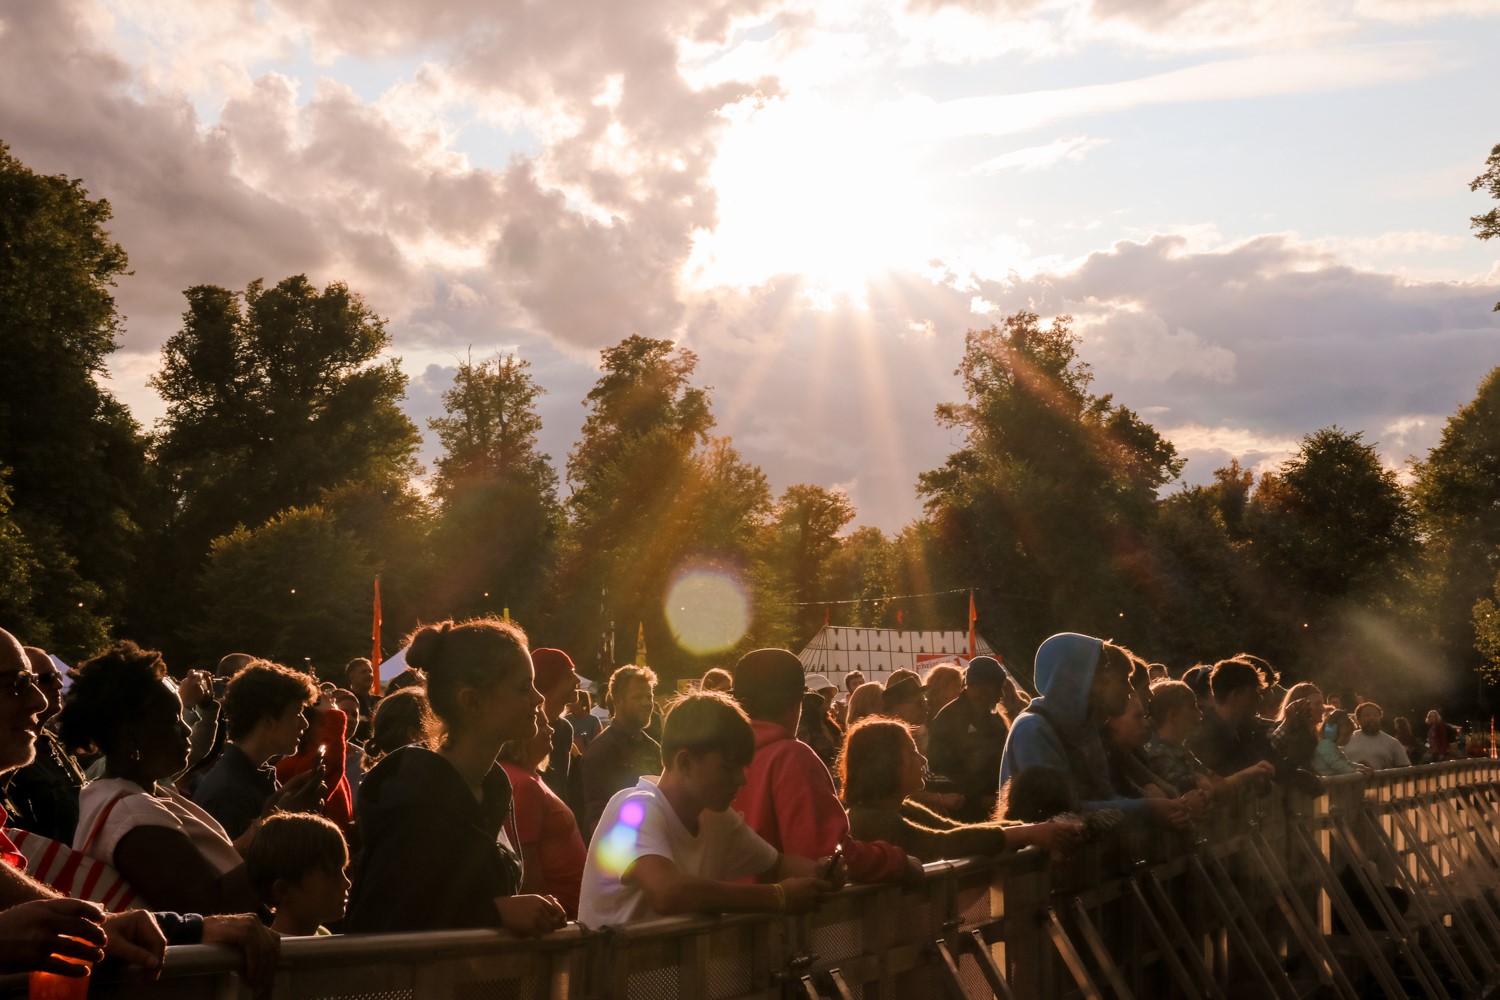 In August, the Iona Community moves into its new festival home at Greenbelt. Wild Goose will be the Greenbelt Festival venue for daily worship, writers’ events and workshops.